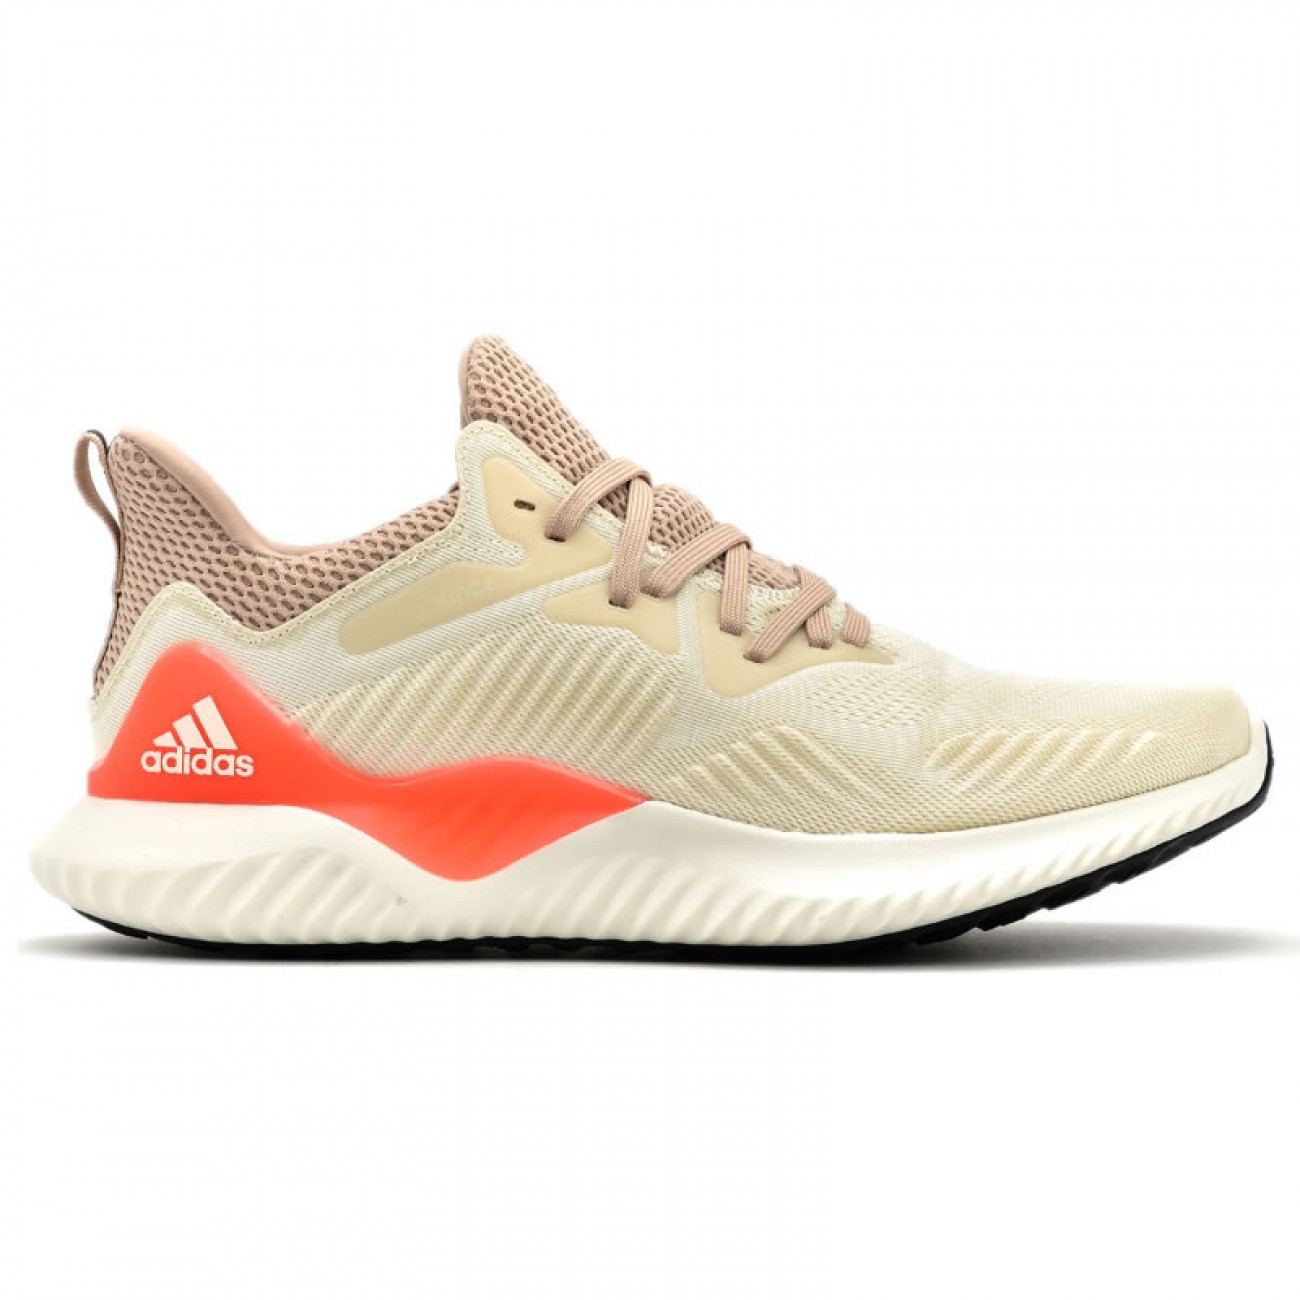 Adidas Alphabounce Beyond Shoes White/Beige CG4763